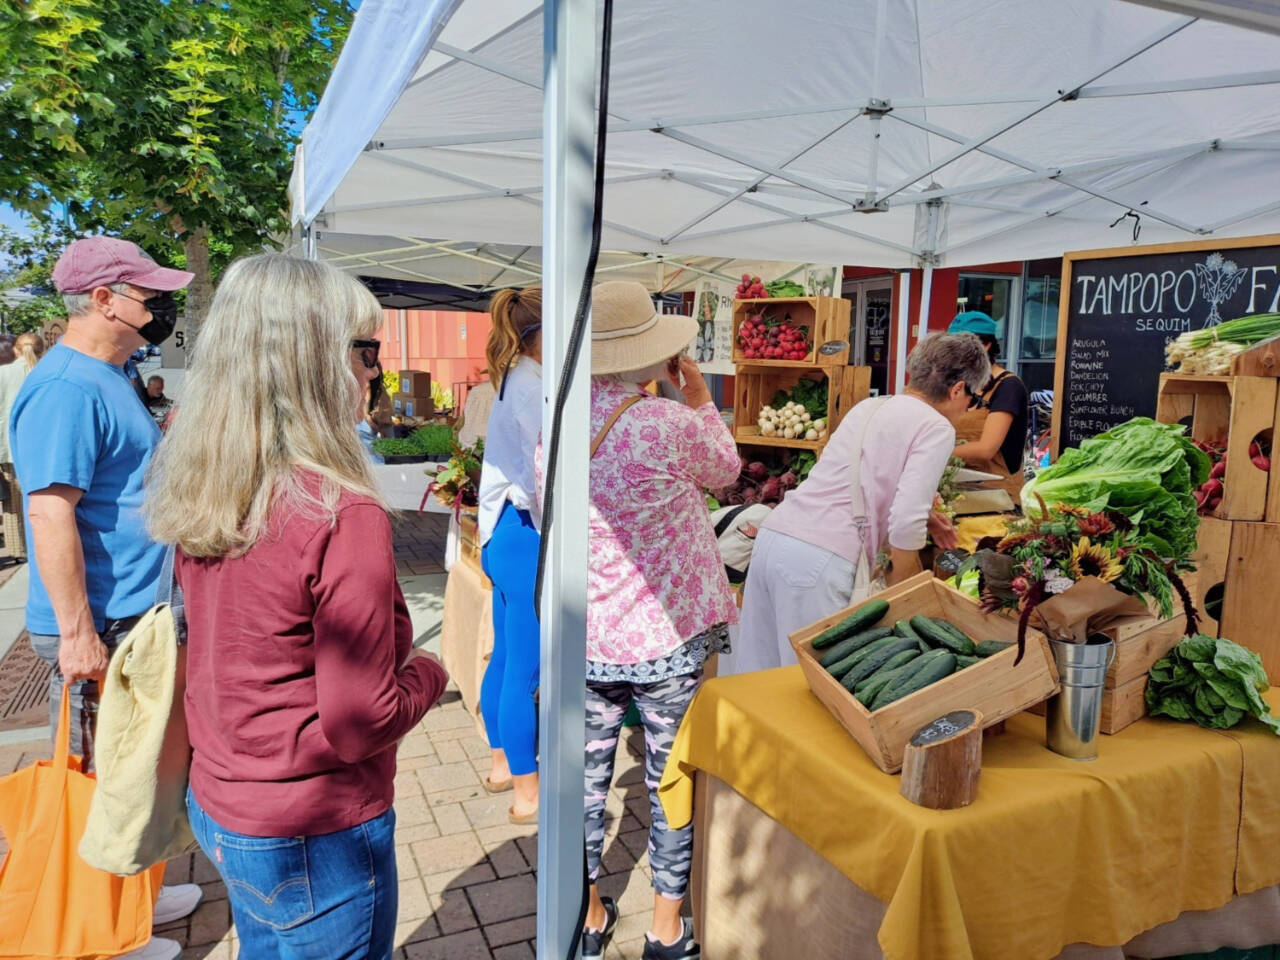 Photo by Aaron Brown/Sequim Farmers & Artisans Market / Visitors to the Sequim Farmers & Artisans Market check out the offerings at the Tampopo Farm booth.